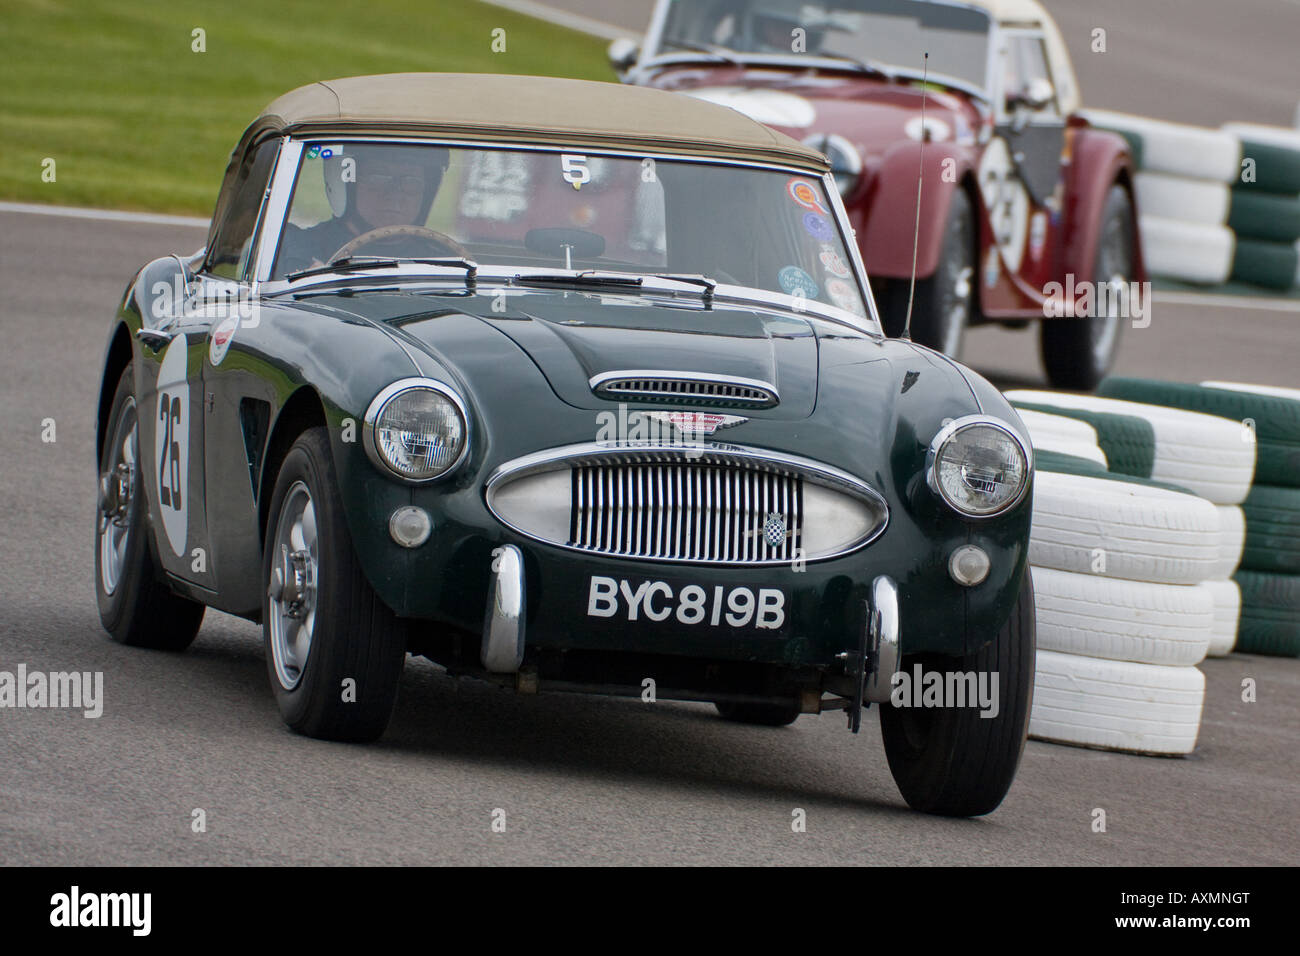 1964 Austin Healey 3000 Mk3 during the GRRC Sprint at Goodwood, Sussex, UK. Stock Photo